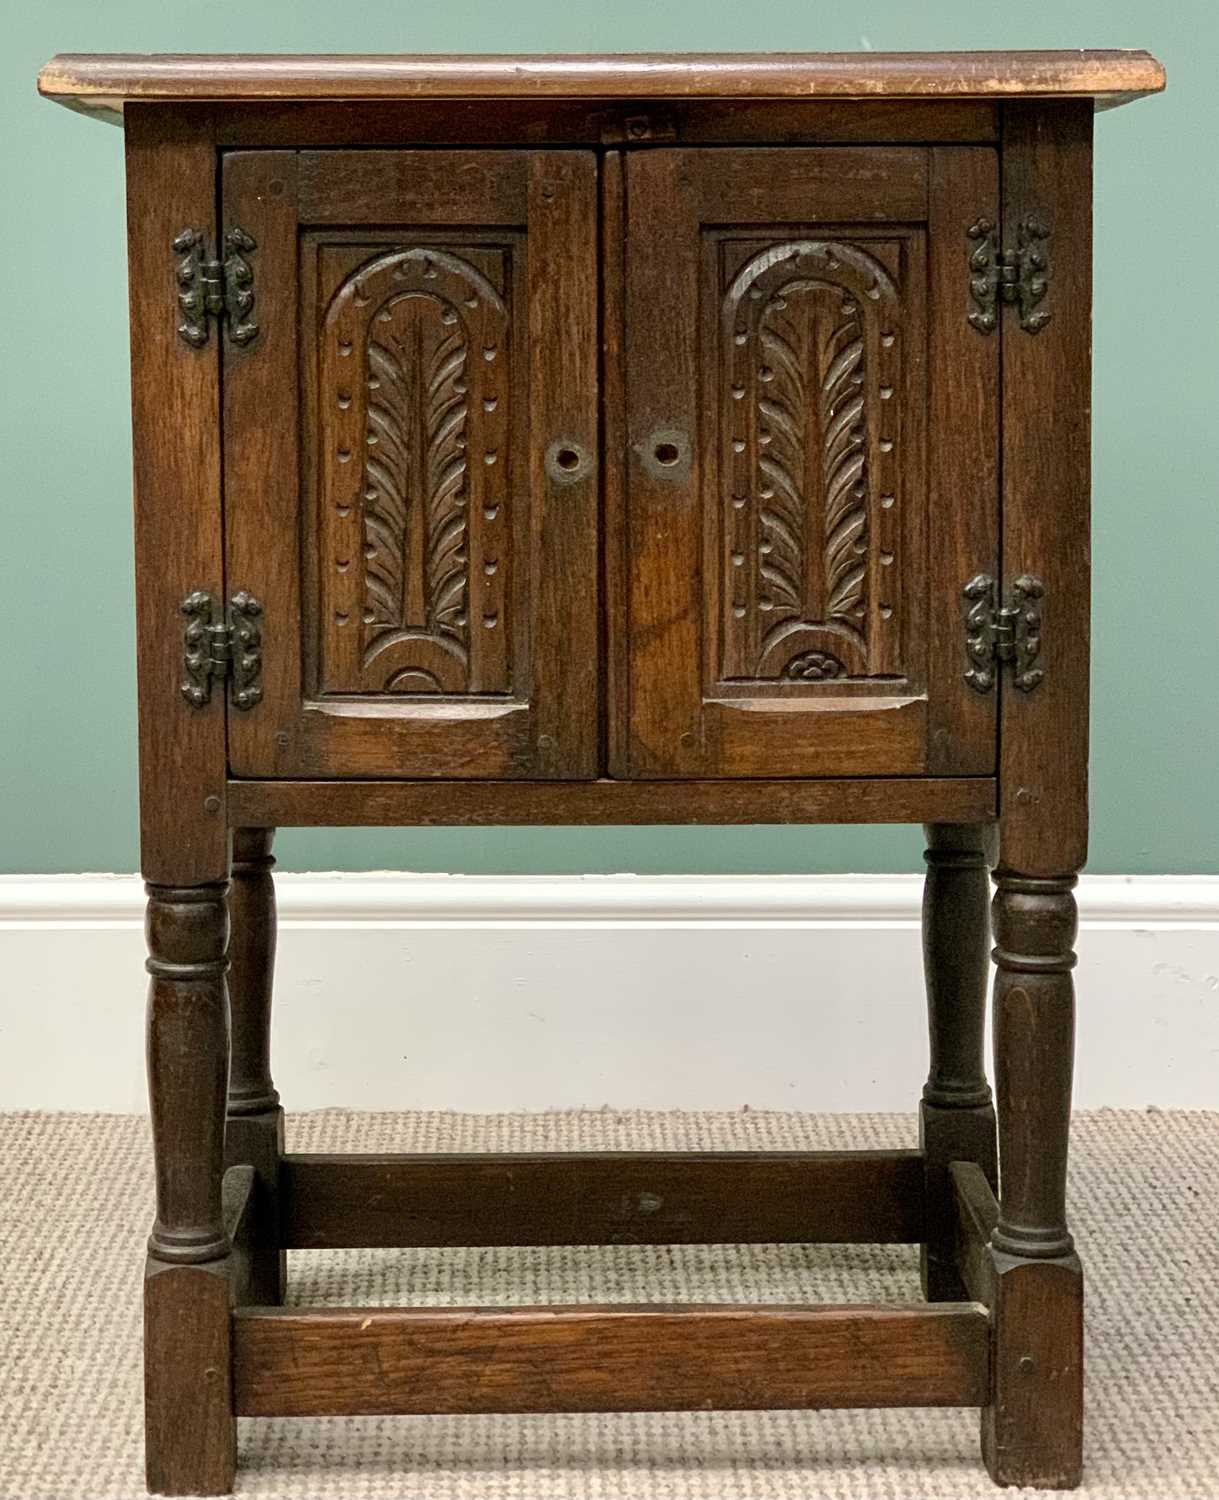 FURNITURE ASSORTMENT (2) - reproduction oak hutch type cupboard with carved doors, on turned and - Image 3 of 6